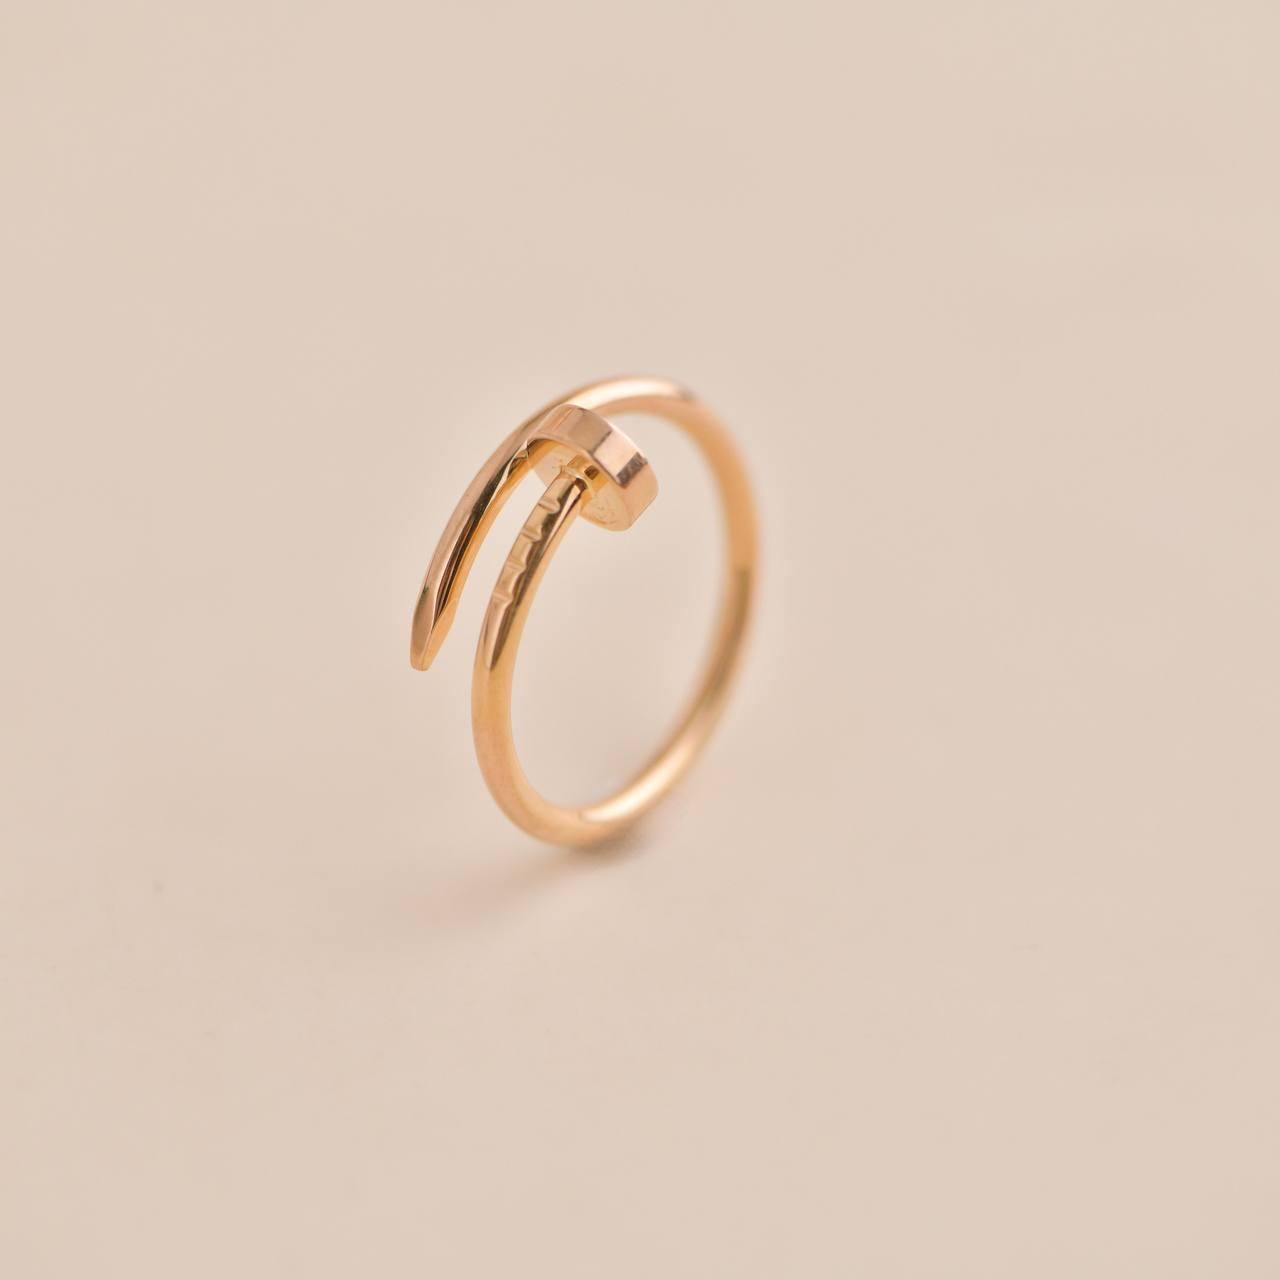 Women's or Men's Cartier Juste un Clou Rose Gold Ring Small Model Size 54